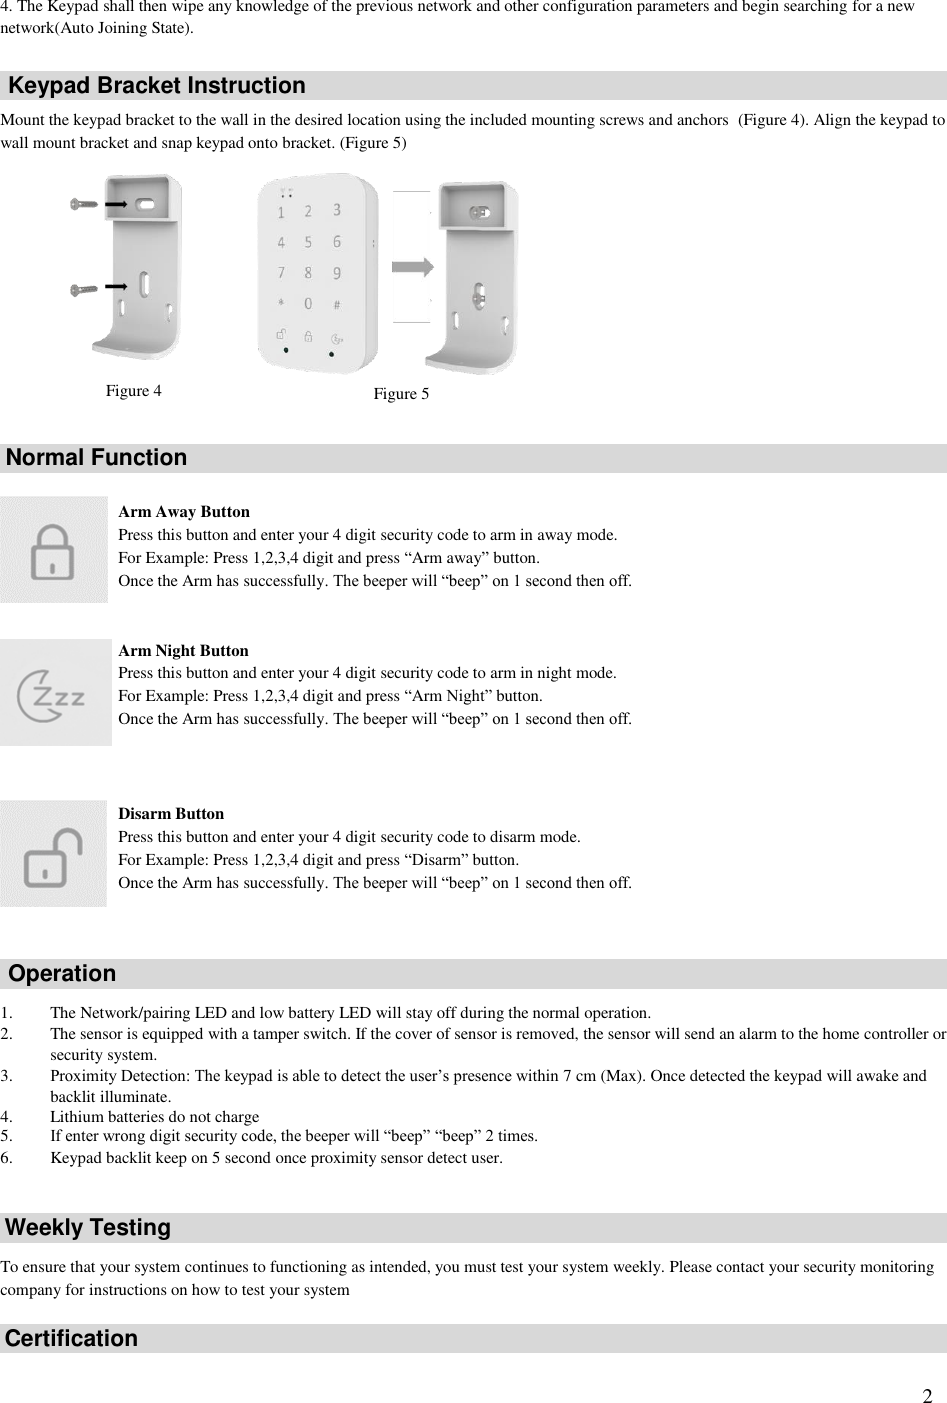   2 4. The Keypad shall then wipe any knowledge of the previous network and other configuration parameters and begin searching for a new network(Auto Joining State).    Mount the keypad bracket to the wall in the desired location using the included mounting screws and anchors  (Figure 4). Align the keypad to wall mount bracket and snap keypad onto bracket. (Figure 5)                Arm Away Button Press this button and enter your 4 digit security code to arm in away mode. For Example: Press 1,2,3,4 digit and press “Arm away” button. Once the Arm has successfully. The beeper will “beep” on 1 second then off.   Arm Night Button Press this button and enter your 4 digit security code to arm in night mode. For Example: Press 1,2,3,4 digit and press “Arm Night” button. Once the Arm has successfully. The beeper will “beep” on 1 second then off.    Disarm Button Press this button and enter your 4 digit security code to disarm mode. For Example: Press 1,2,3,4 digit and press “Disarm” button. Once the Arm has successfully. The beeper will “beep” on 1 second then off.      1. The Network/pairing LED and low battery LED will stay off during the normal operation. 2. The sensor is equipped with a tamper switch. If the cover of sensor is removed, the sensor will send an alarm to the home controller or security system. 3. Proximity Detection: The keypad is able to detect the user’s presence within 7 cm (Max). Once detected the keypad will awake and backlit illuminate. 4. Lithium batteries do not charge 5. If enter wrong digit security code, the beeper will “beep” “beep” 2 times. 6. Keypad backlit keep on 5 second once proximity sensor detect user.     To ensure that your system continues to functioning as intended, you must test your system weekly. Please contact your security monitoring company for instructions on how to test your system    Normal Function Weekly Testing Certification Operation Keypad Bracket Instruction Figure 4 Figure 5 